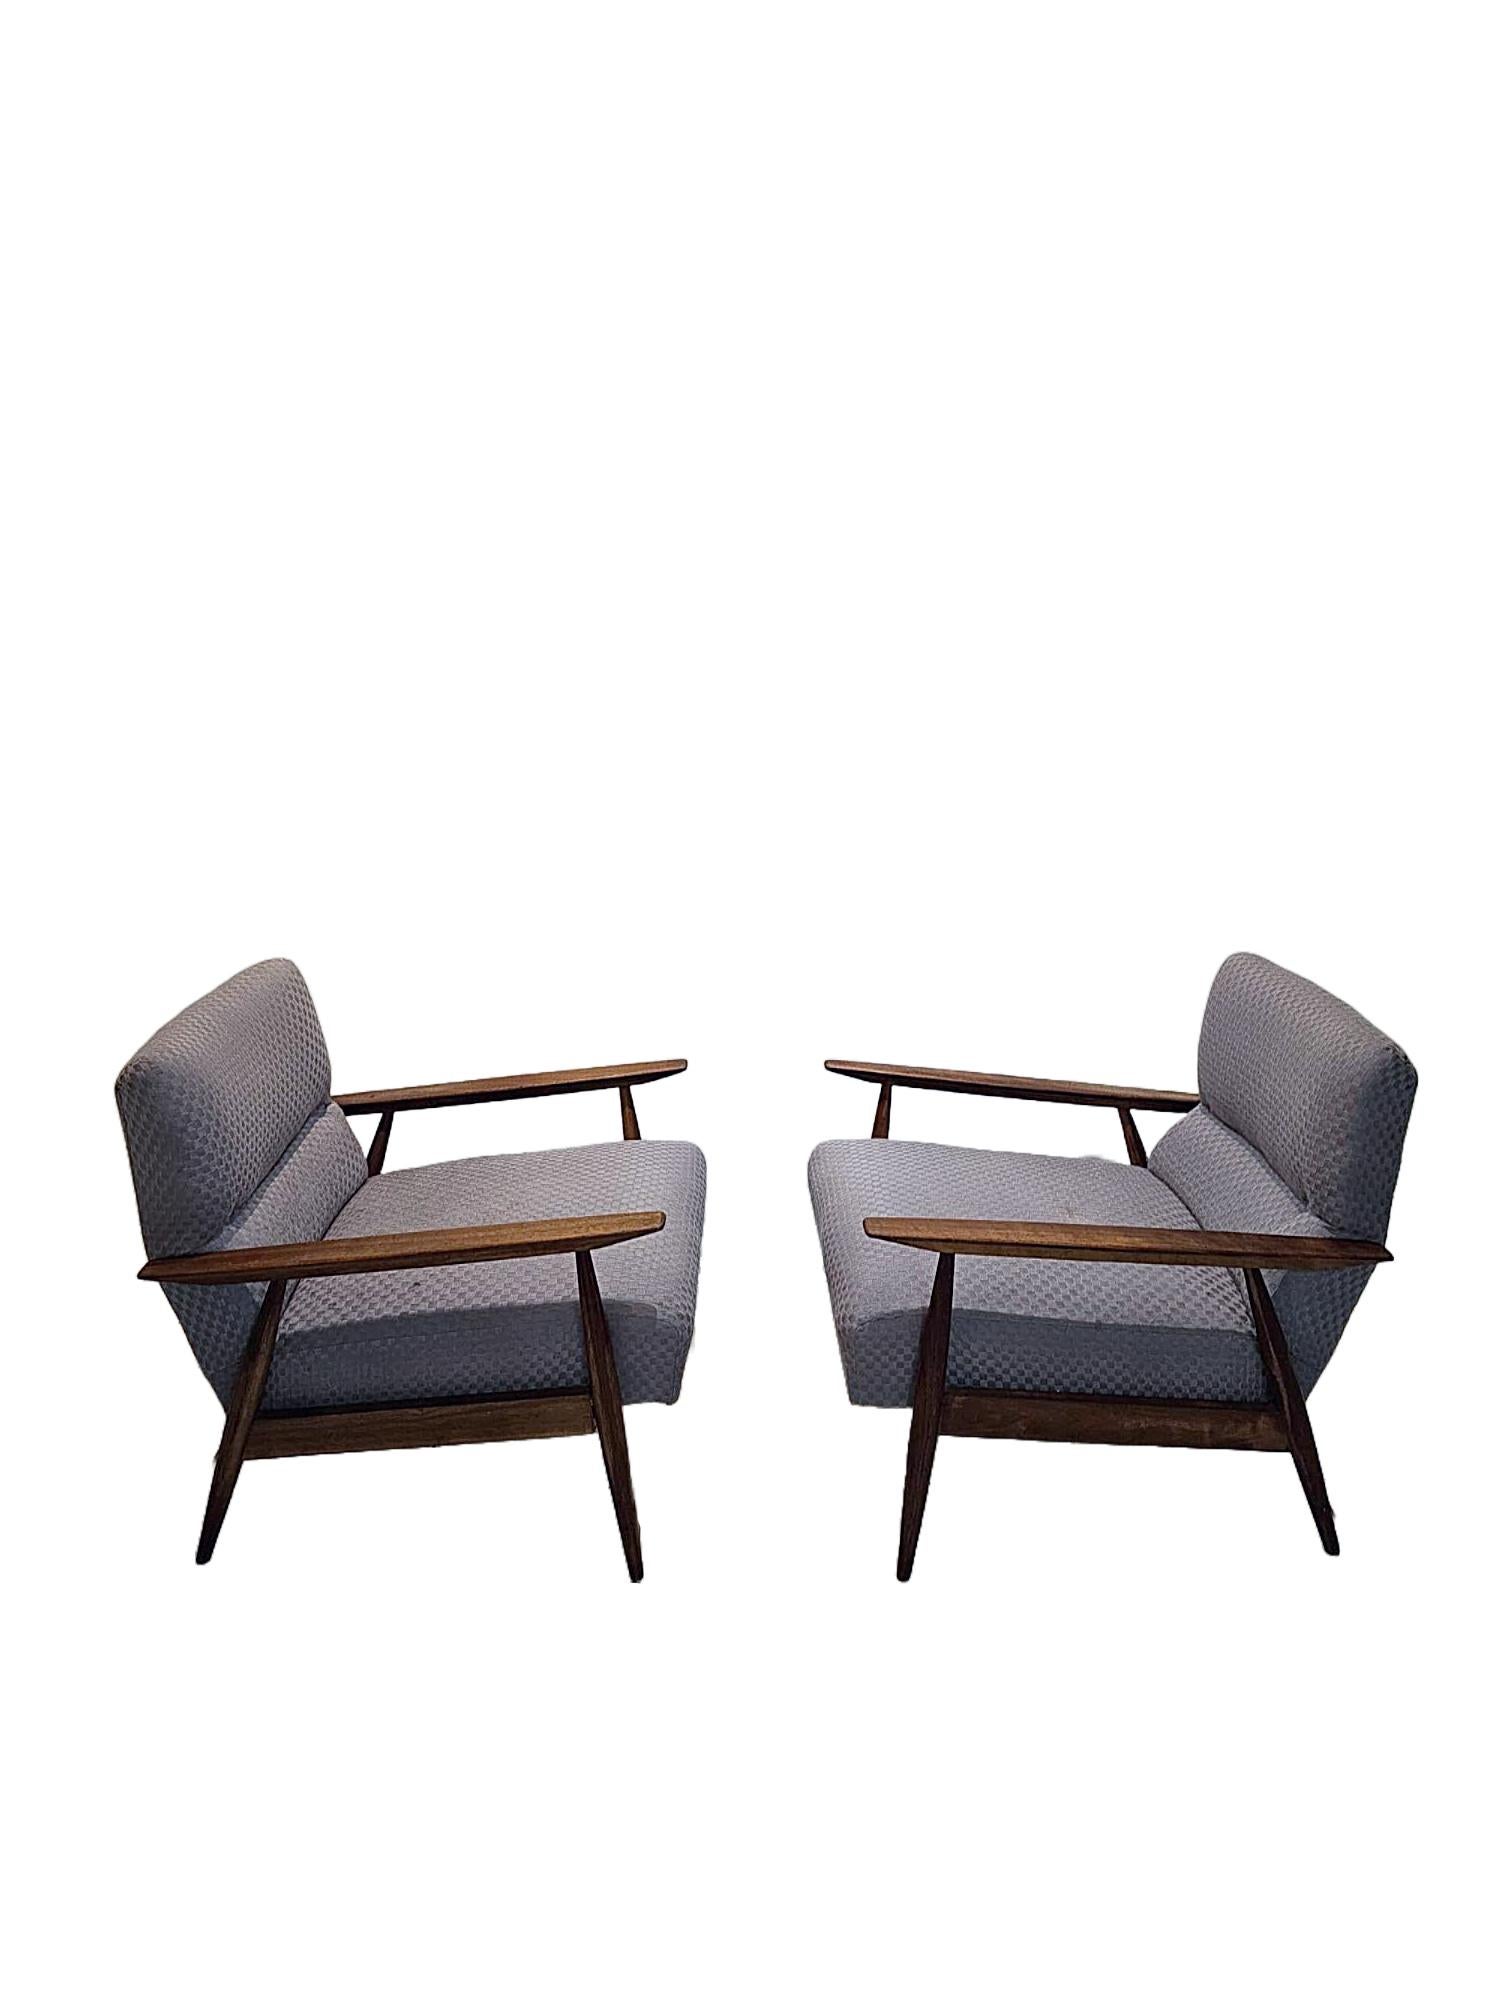 This unique armchair set will fit perfectly in any modern or retro setting. Has the original fabric in good condition and is extremely sturdy and comfortable. The back rest is has a smart bend in the design signalling a very well made piece of